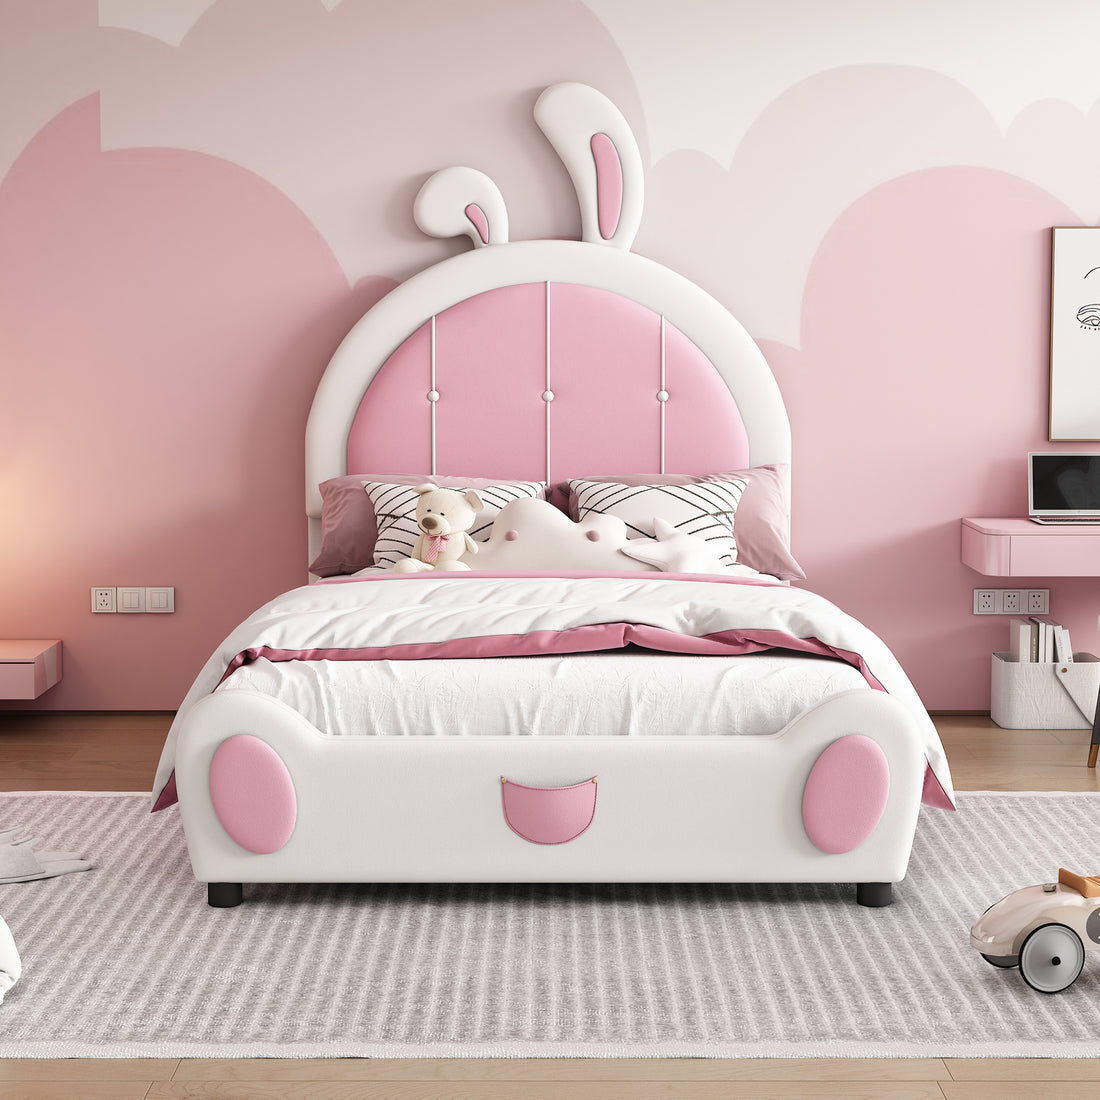 Twin Size Upholstered Platform Bed With Rabbit